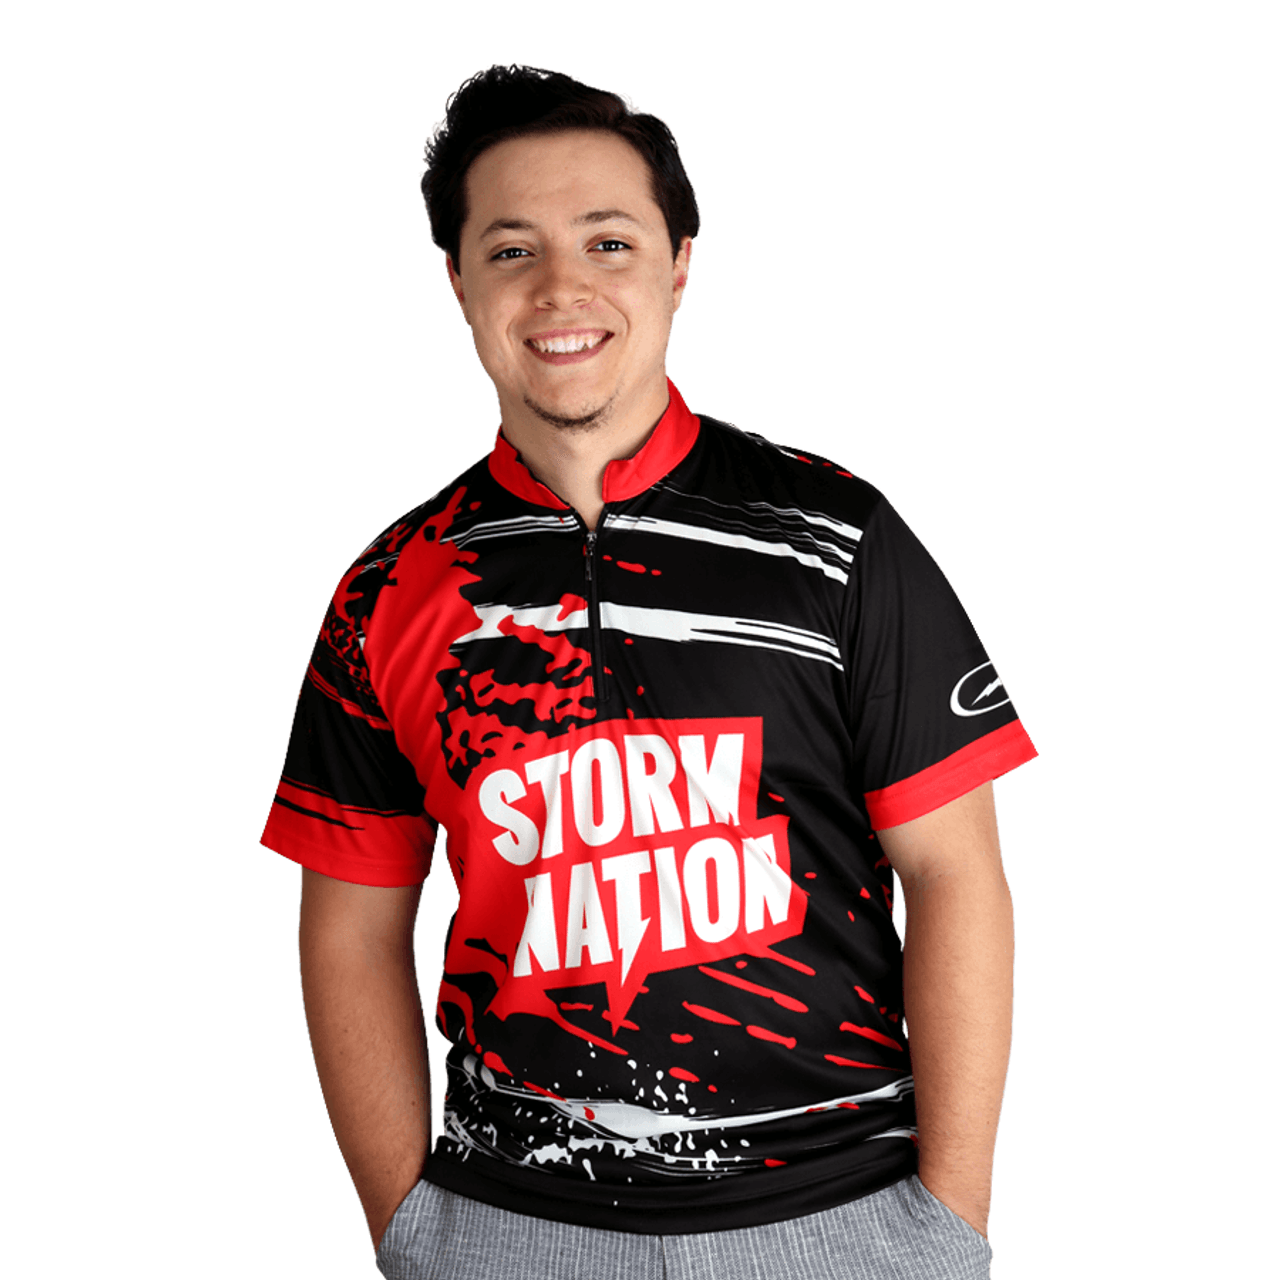 Get Some Storm Bowling Jersey